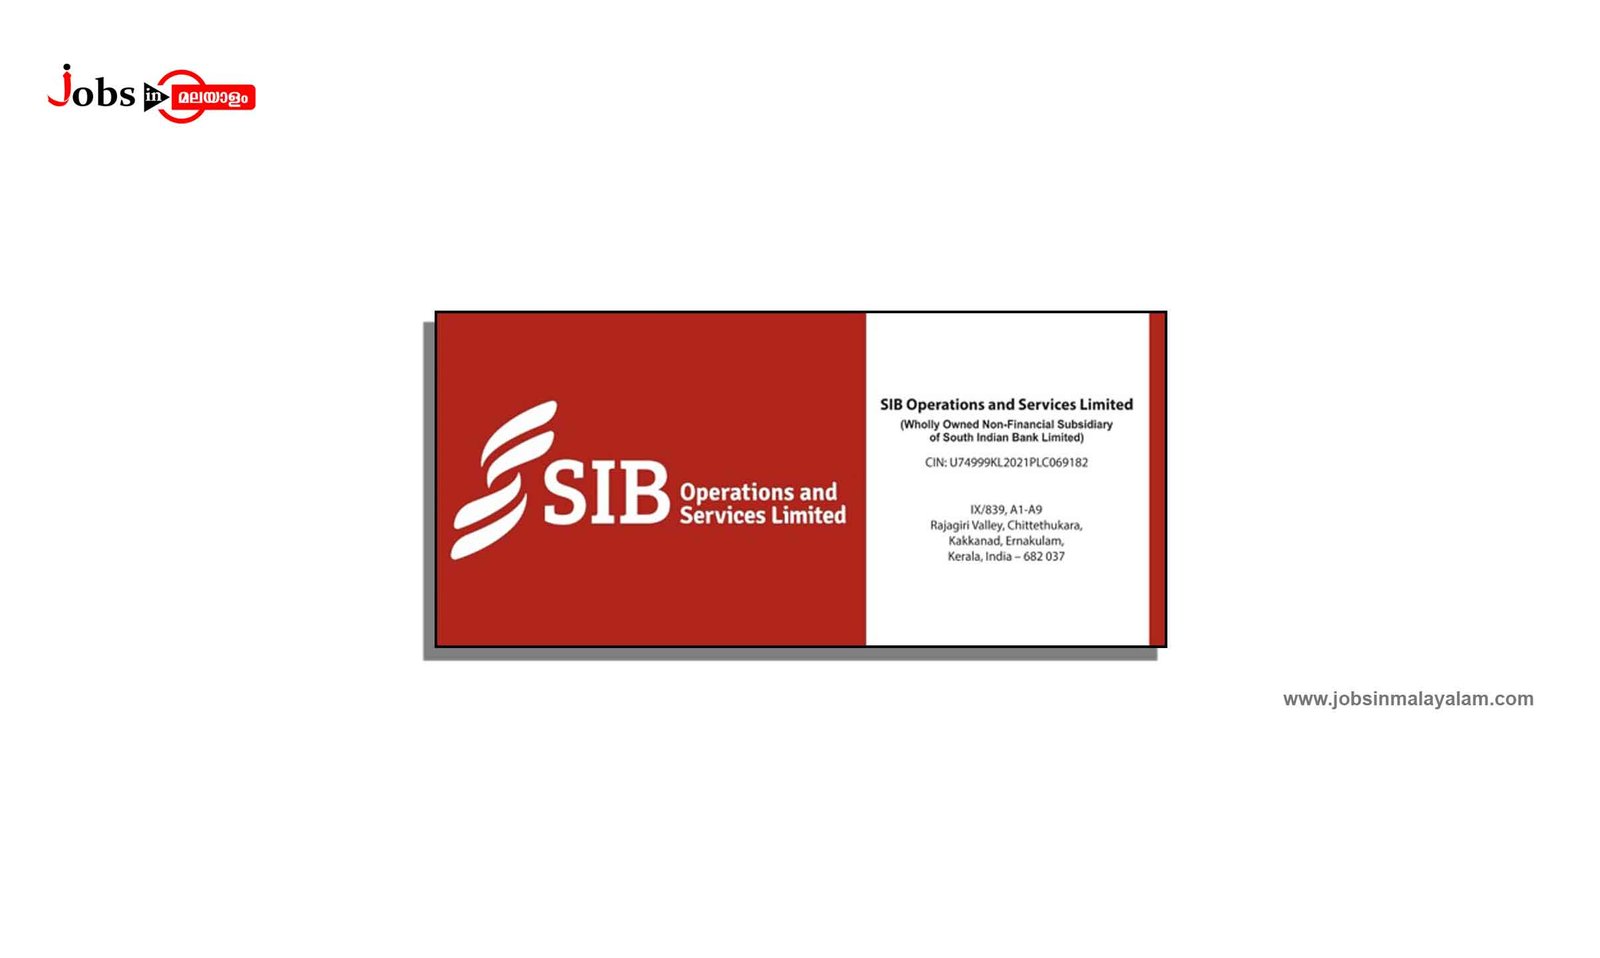 SIB Operations and Services Limited (SIBOSL)